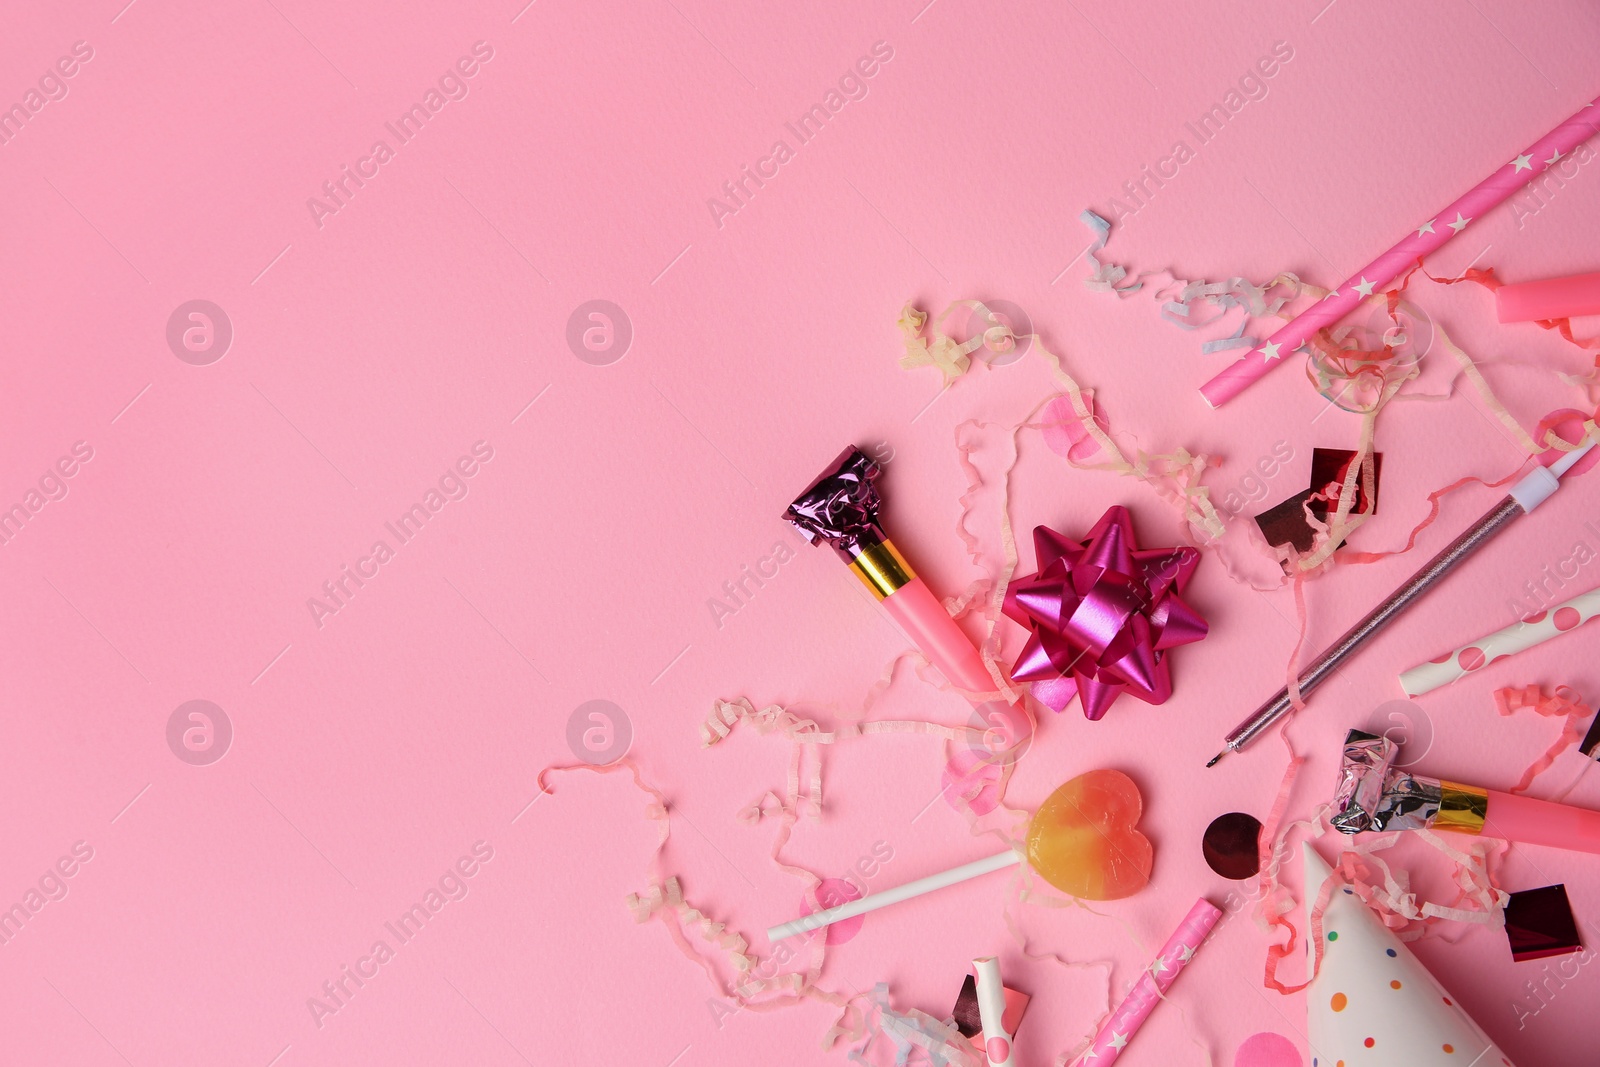 Photo of Party blowers, lollipop and festive decor on pink background, flat lay. Space for text